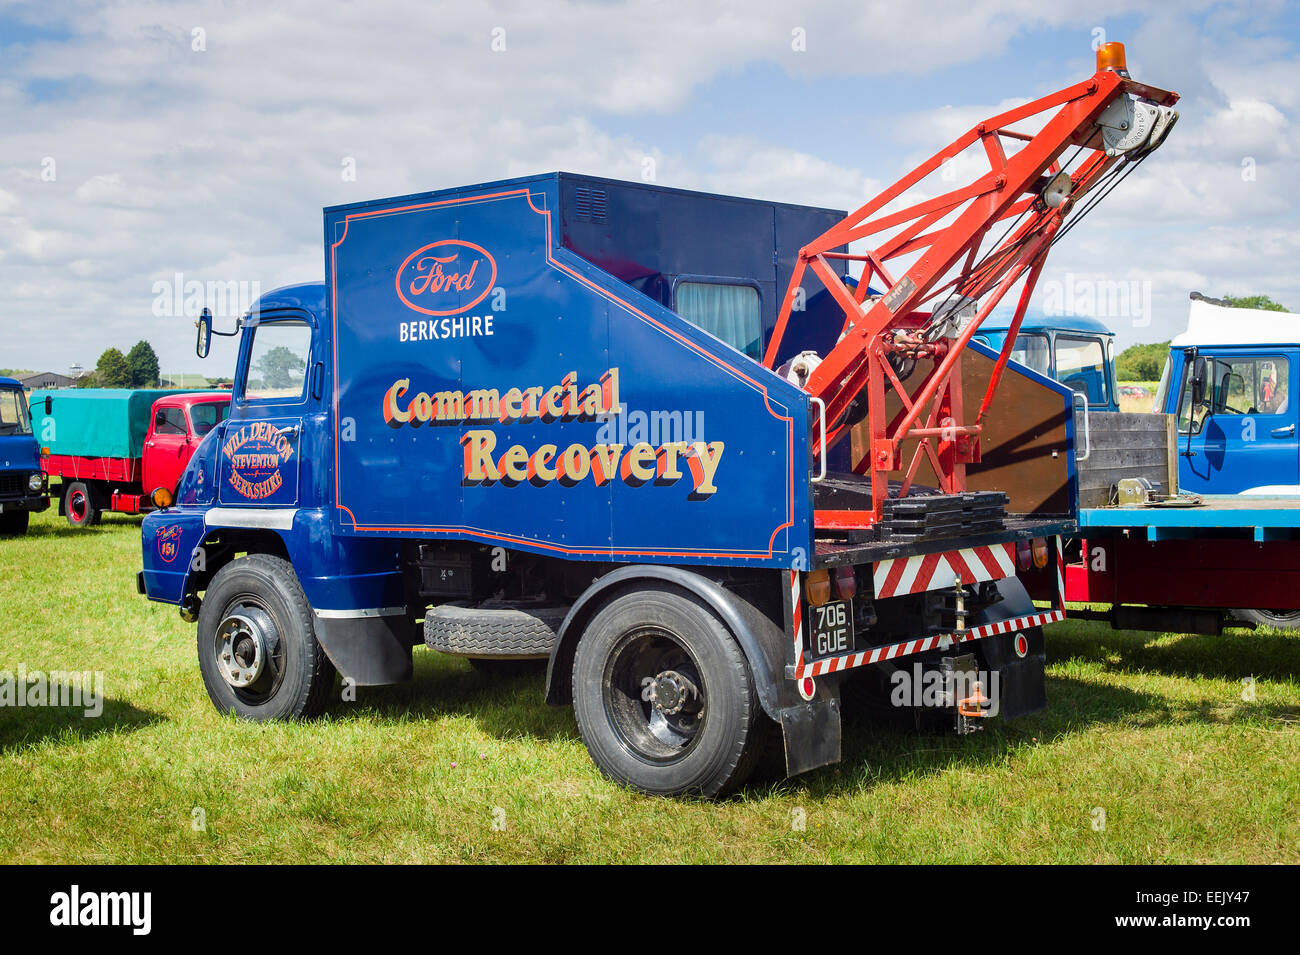 Ford Thames Trader commercial recovery vehicle from 1960s in UK Stock Photo